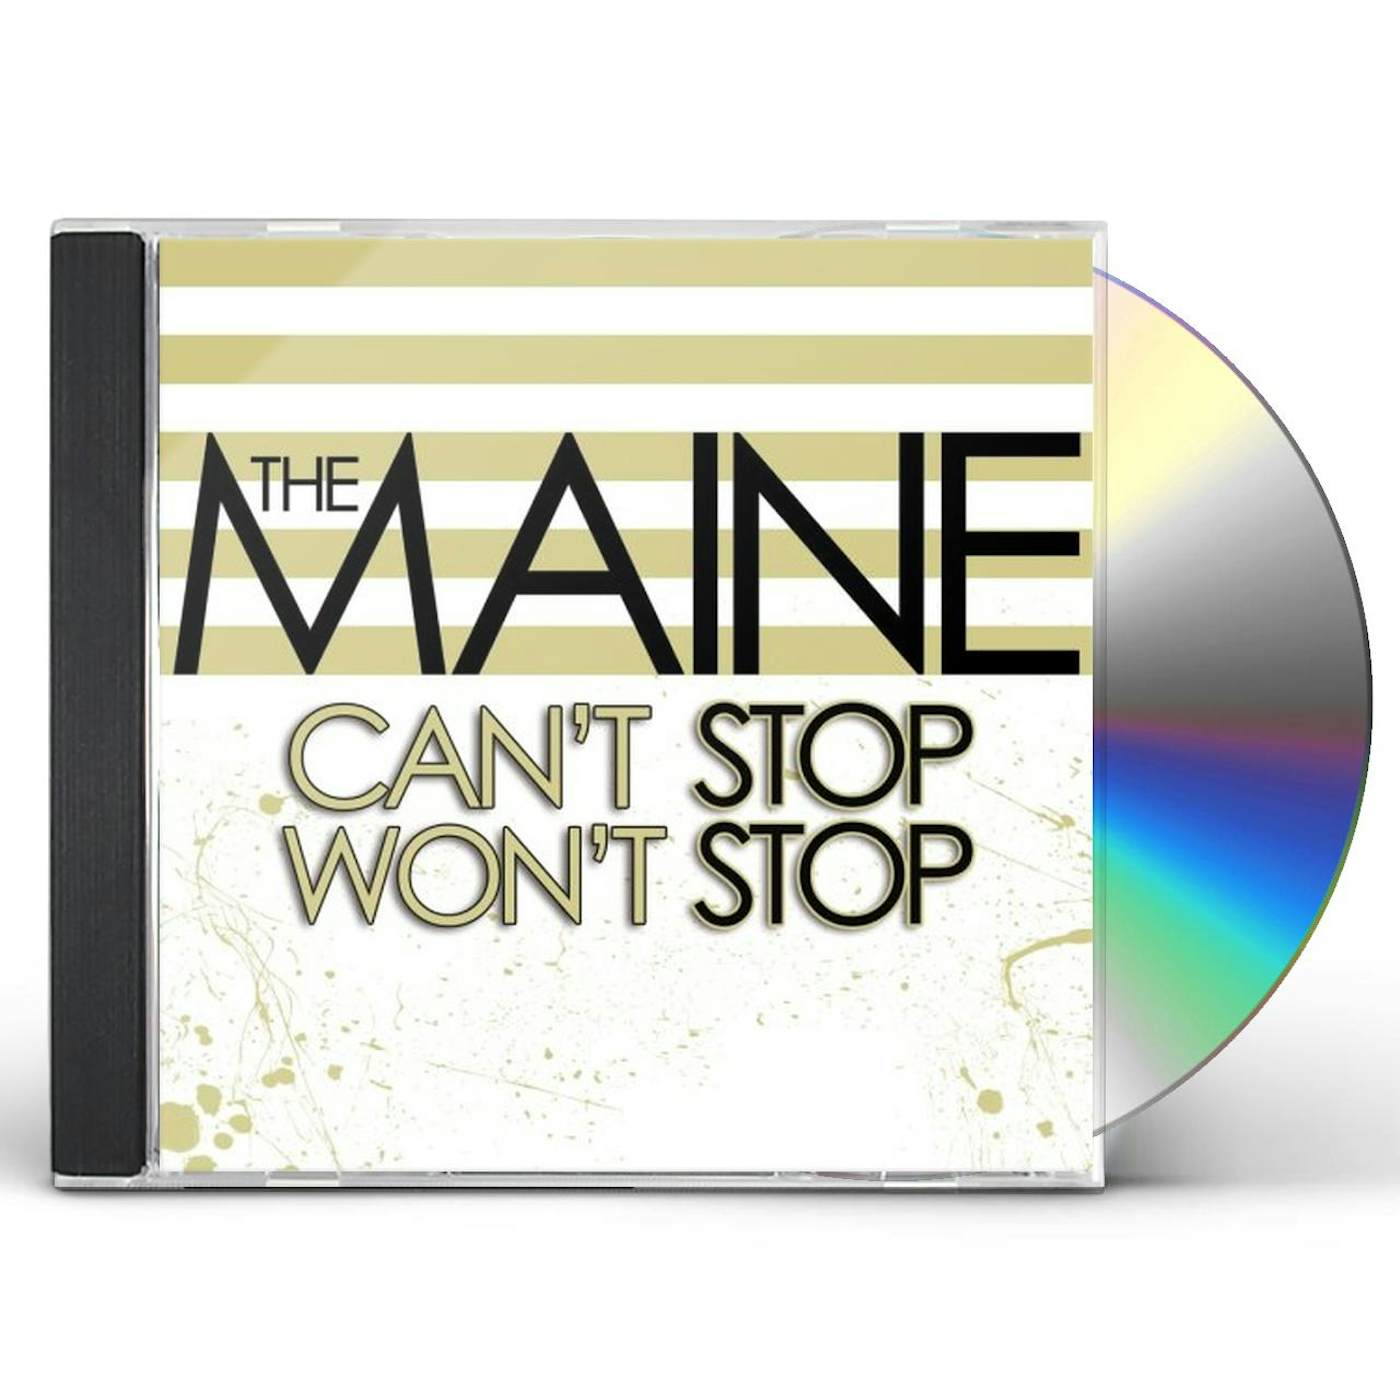 The Maine CAN'T STOP WON'T STOP CD